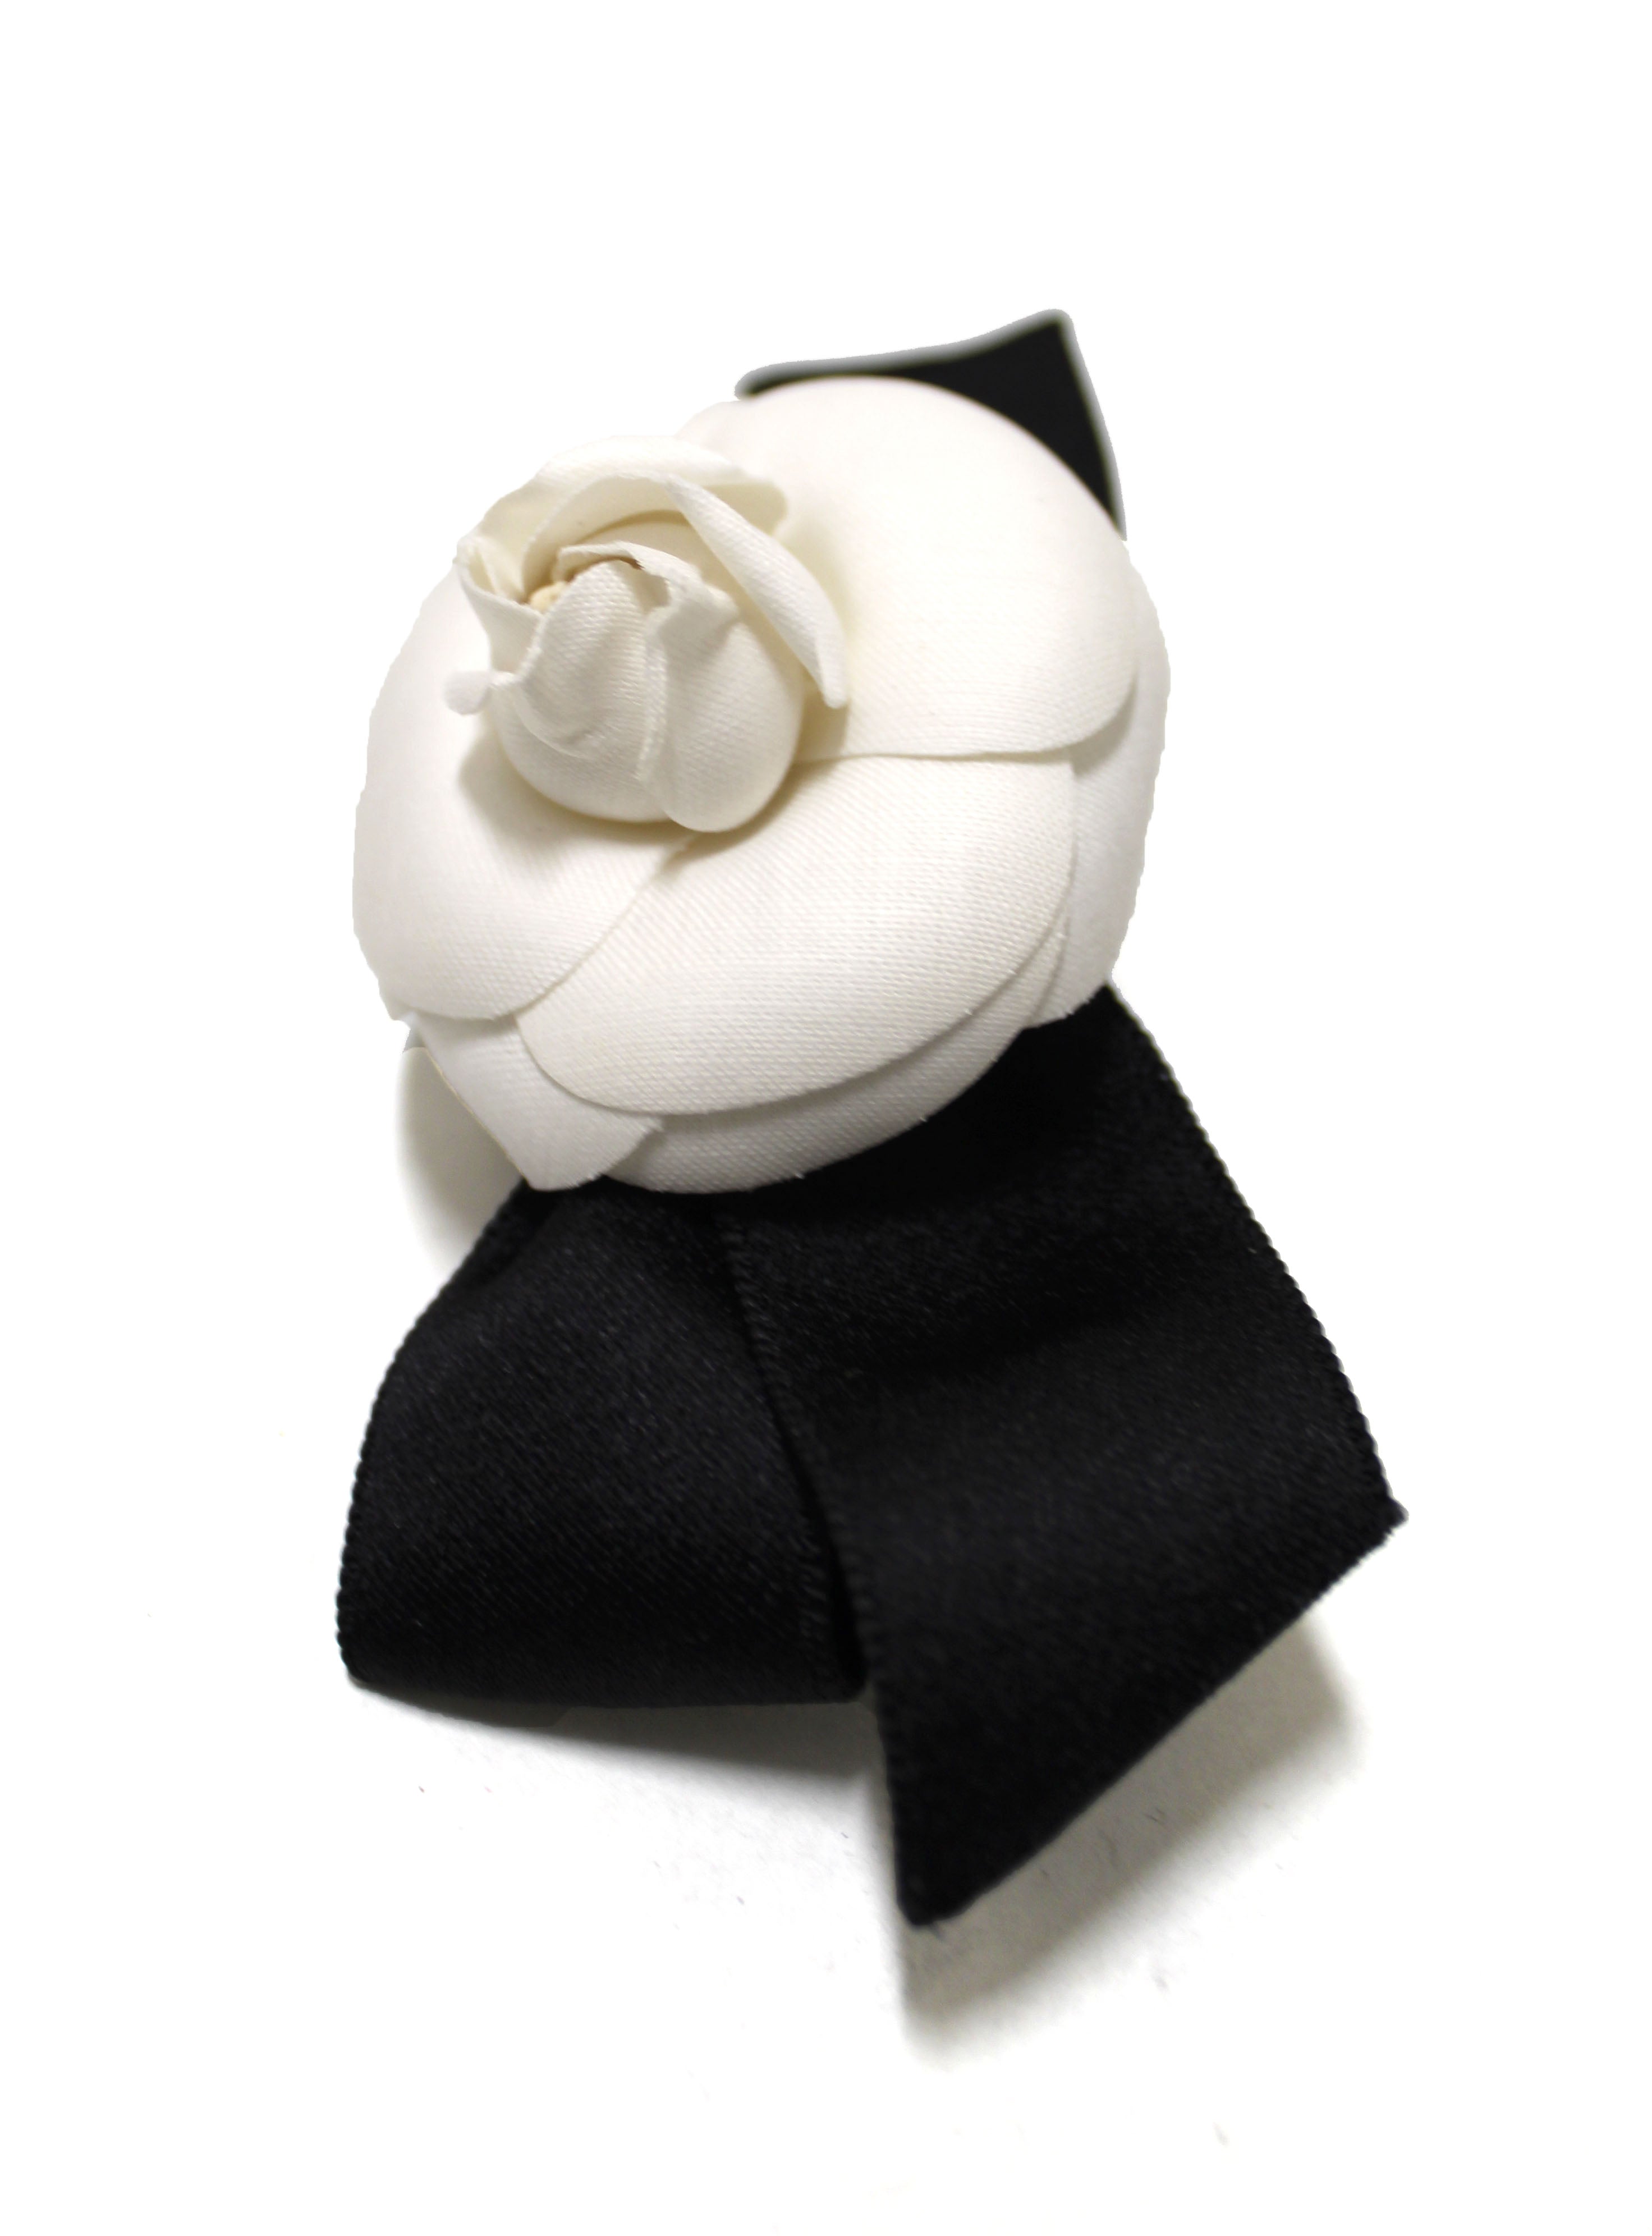 Authentic New Chanel Black/White Camelia Flower Satin Bow Barrette Hair Clip Hair Accessory